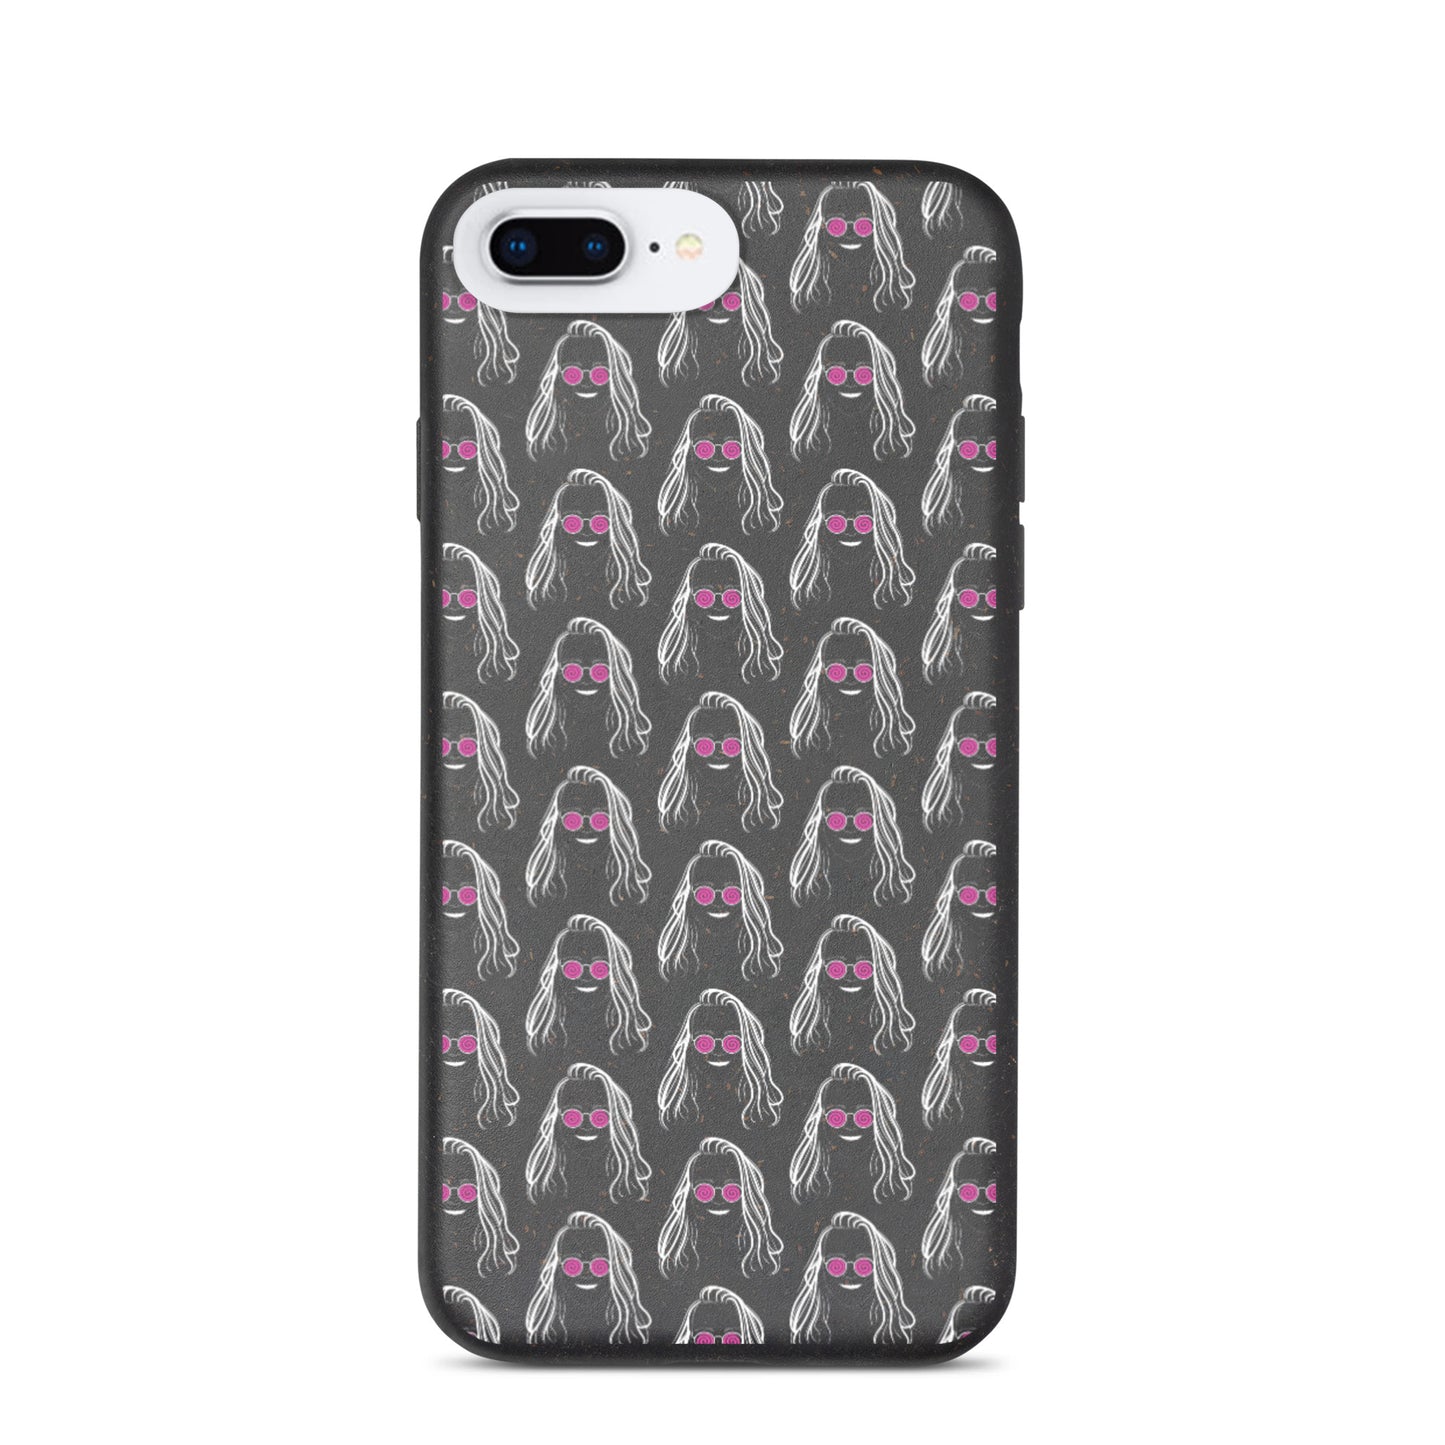 "HypnotEyes" Speckled iPhone case